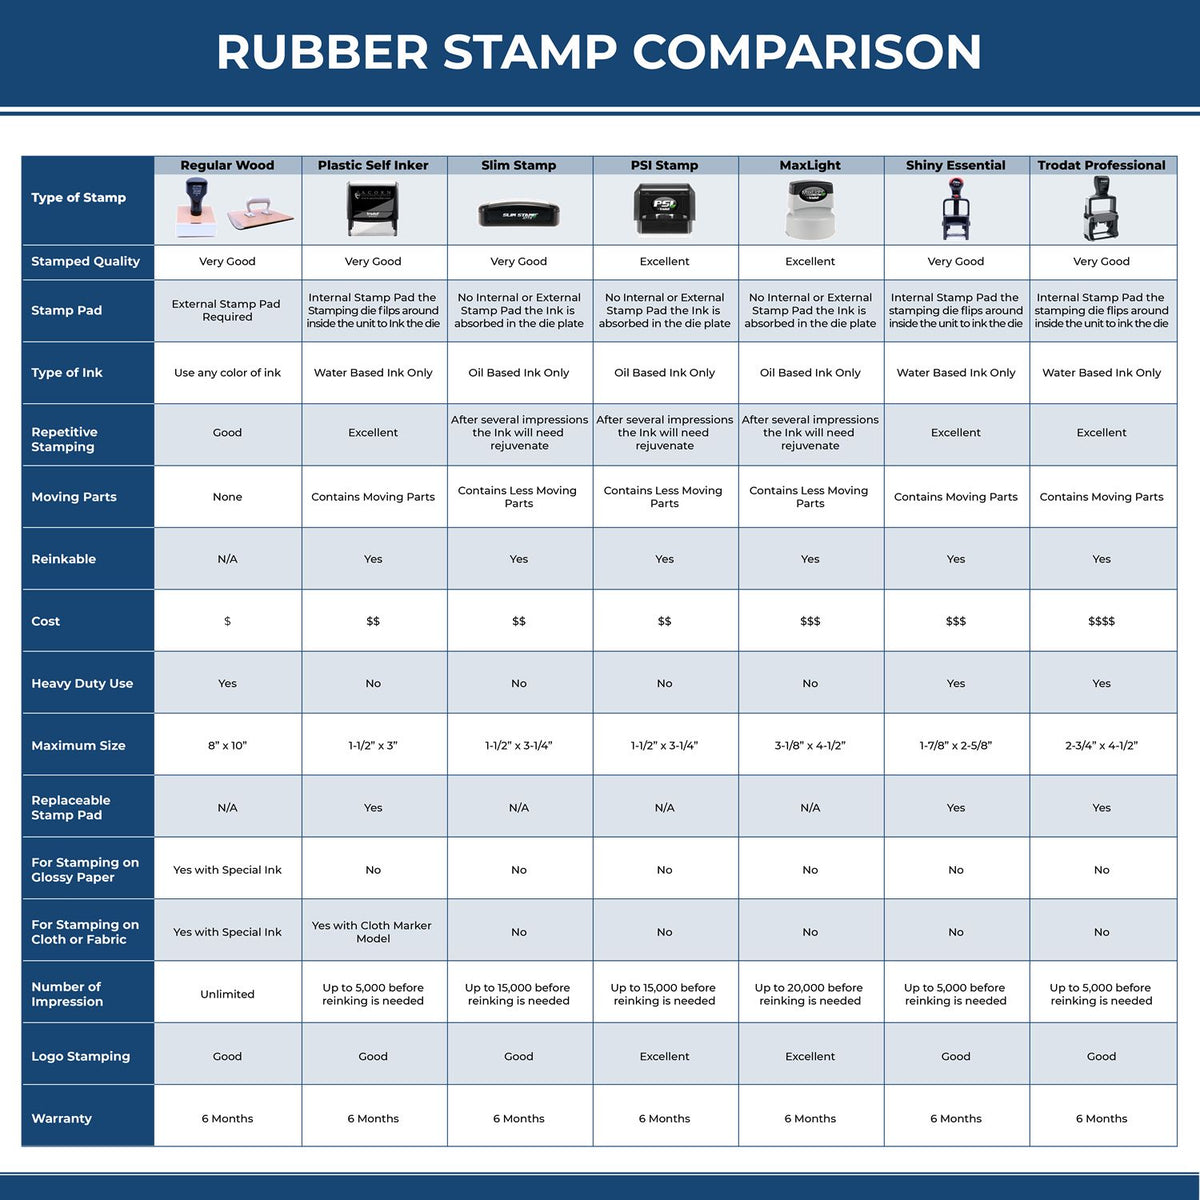 A comparison chart for the different types of mount models available for the Self-Inking Rectangular Idaho Notary Stamp.